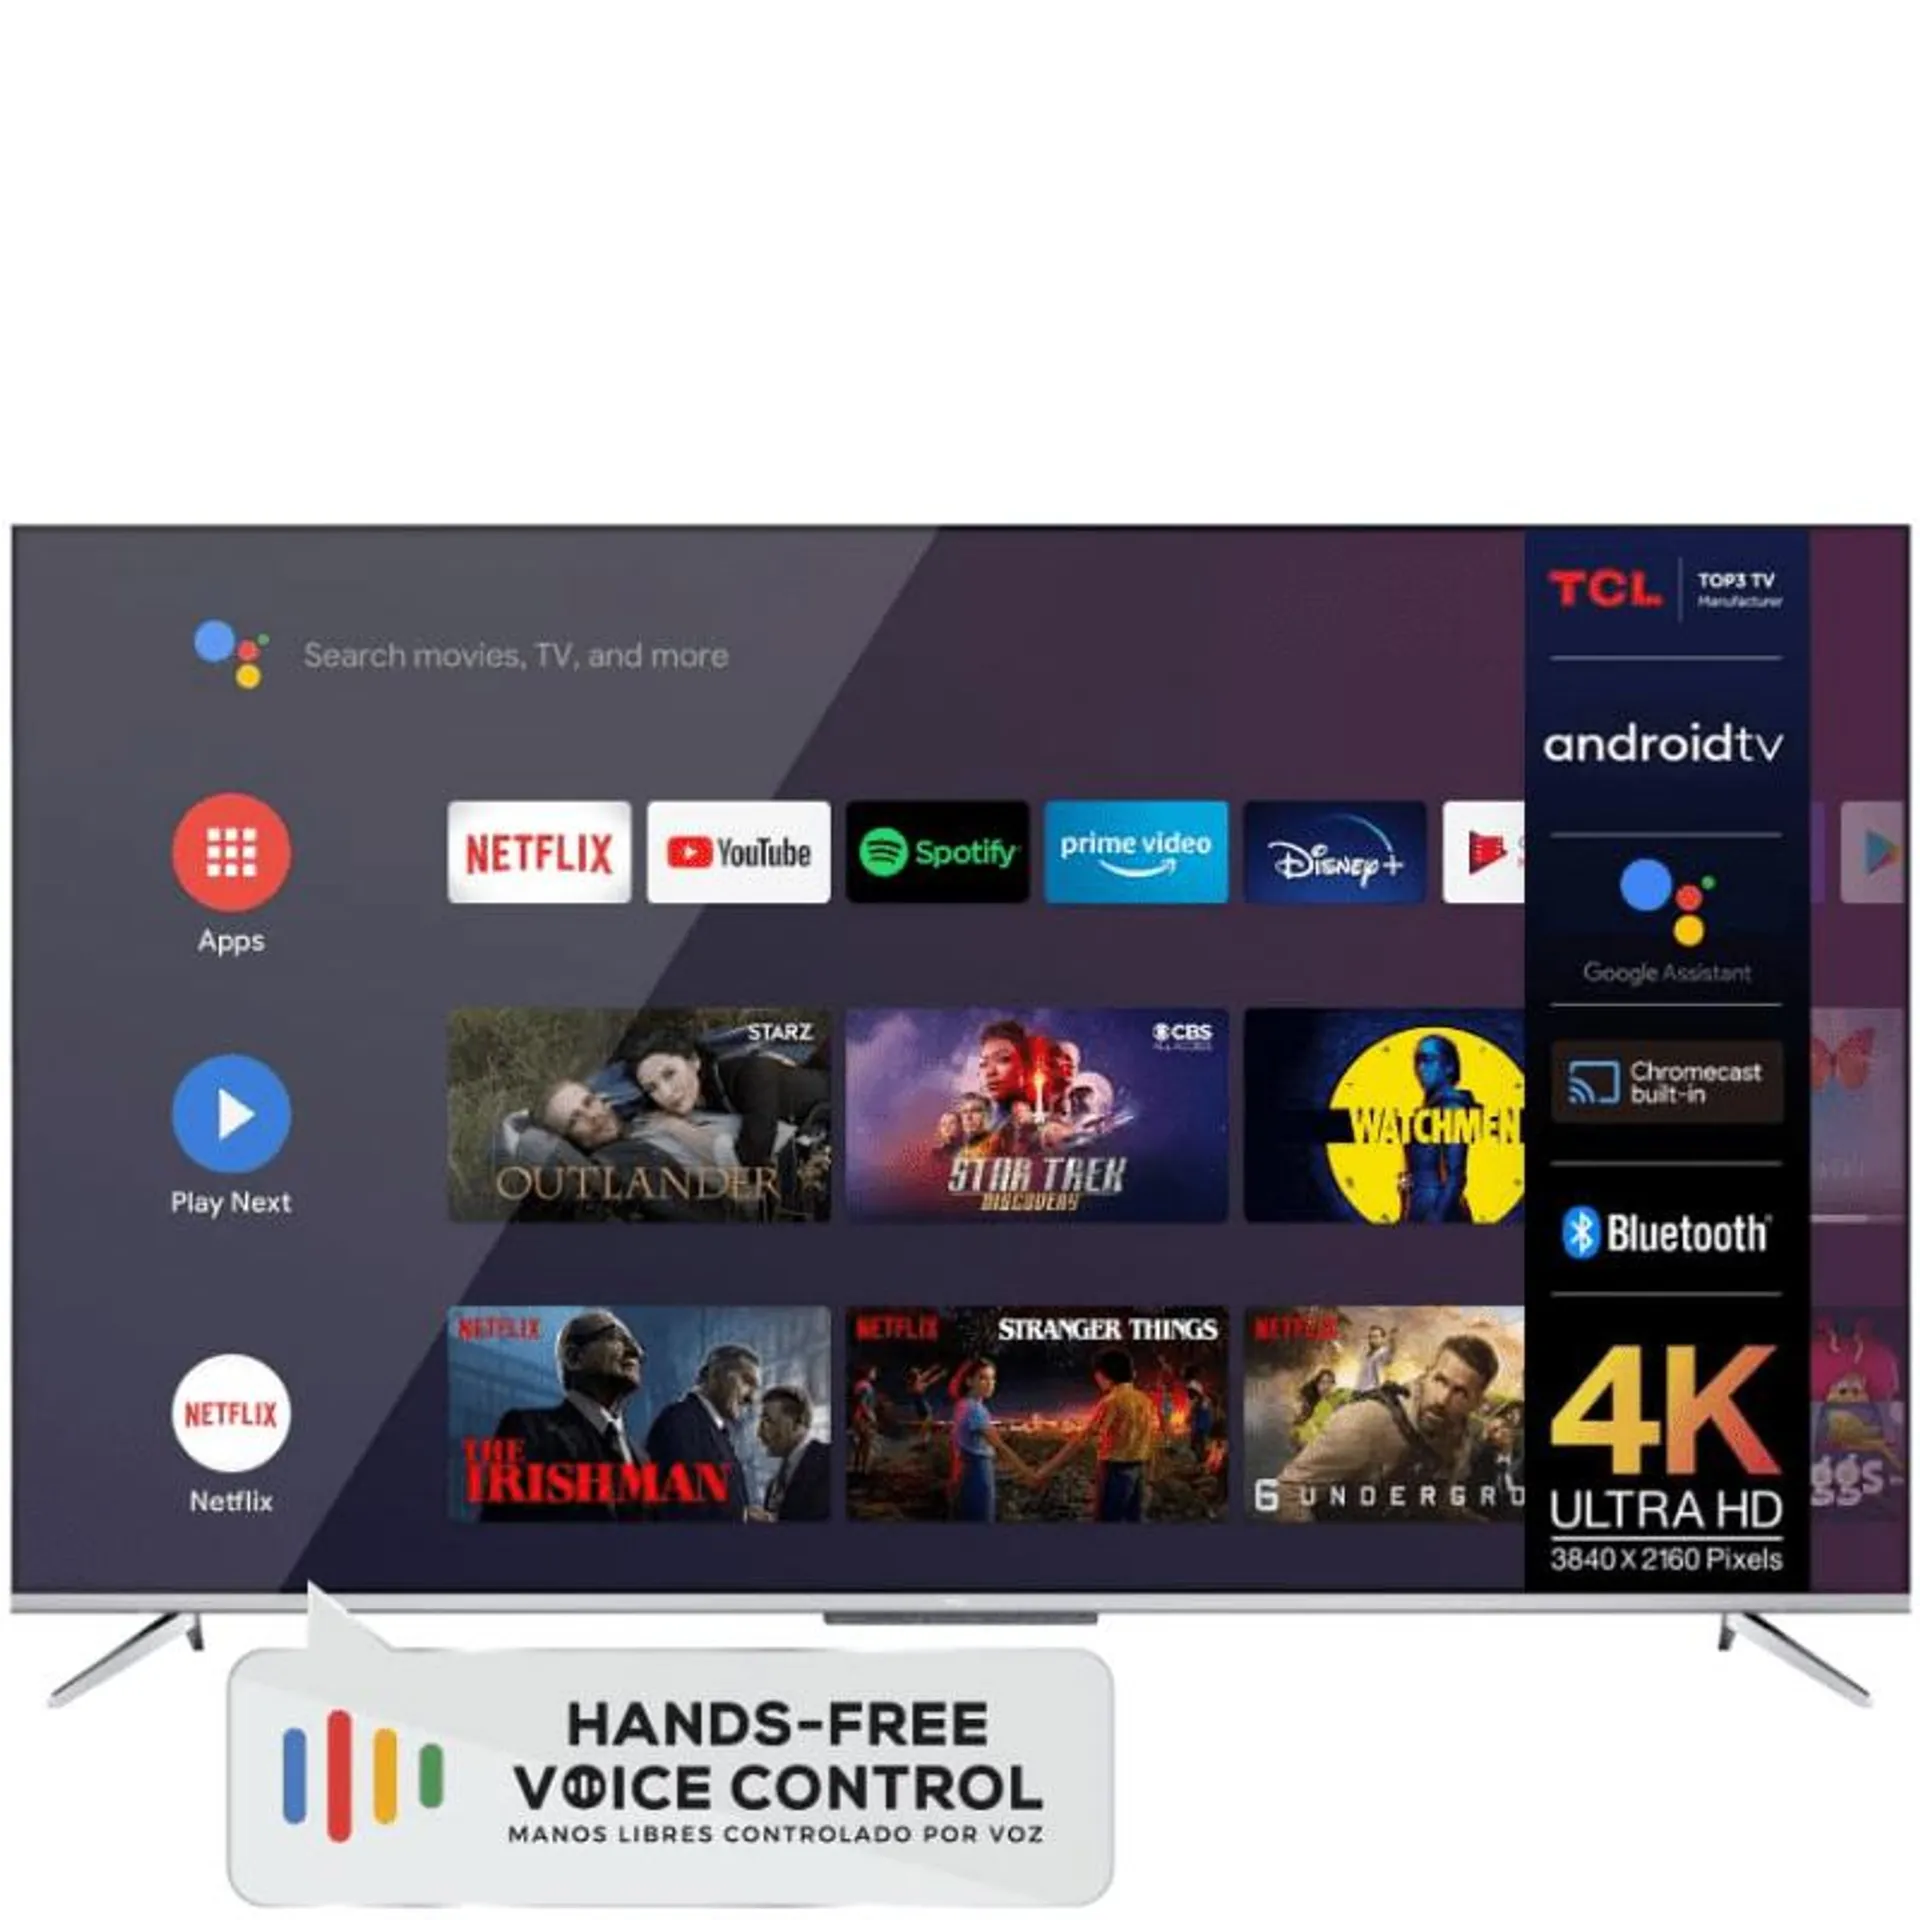 ANDROID TV 65" 4K ULTRA HD